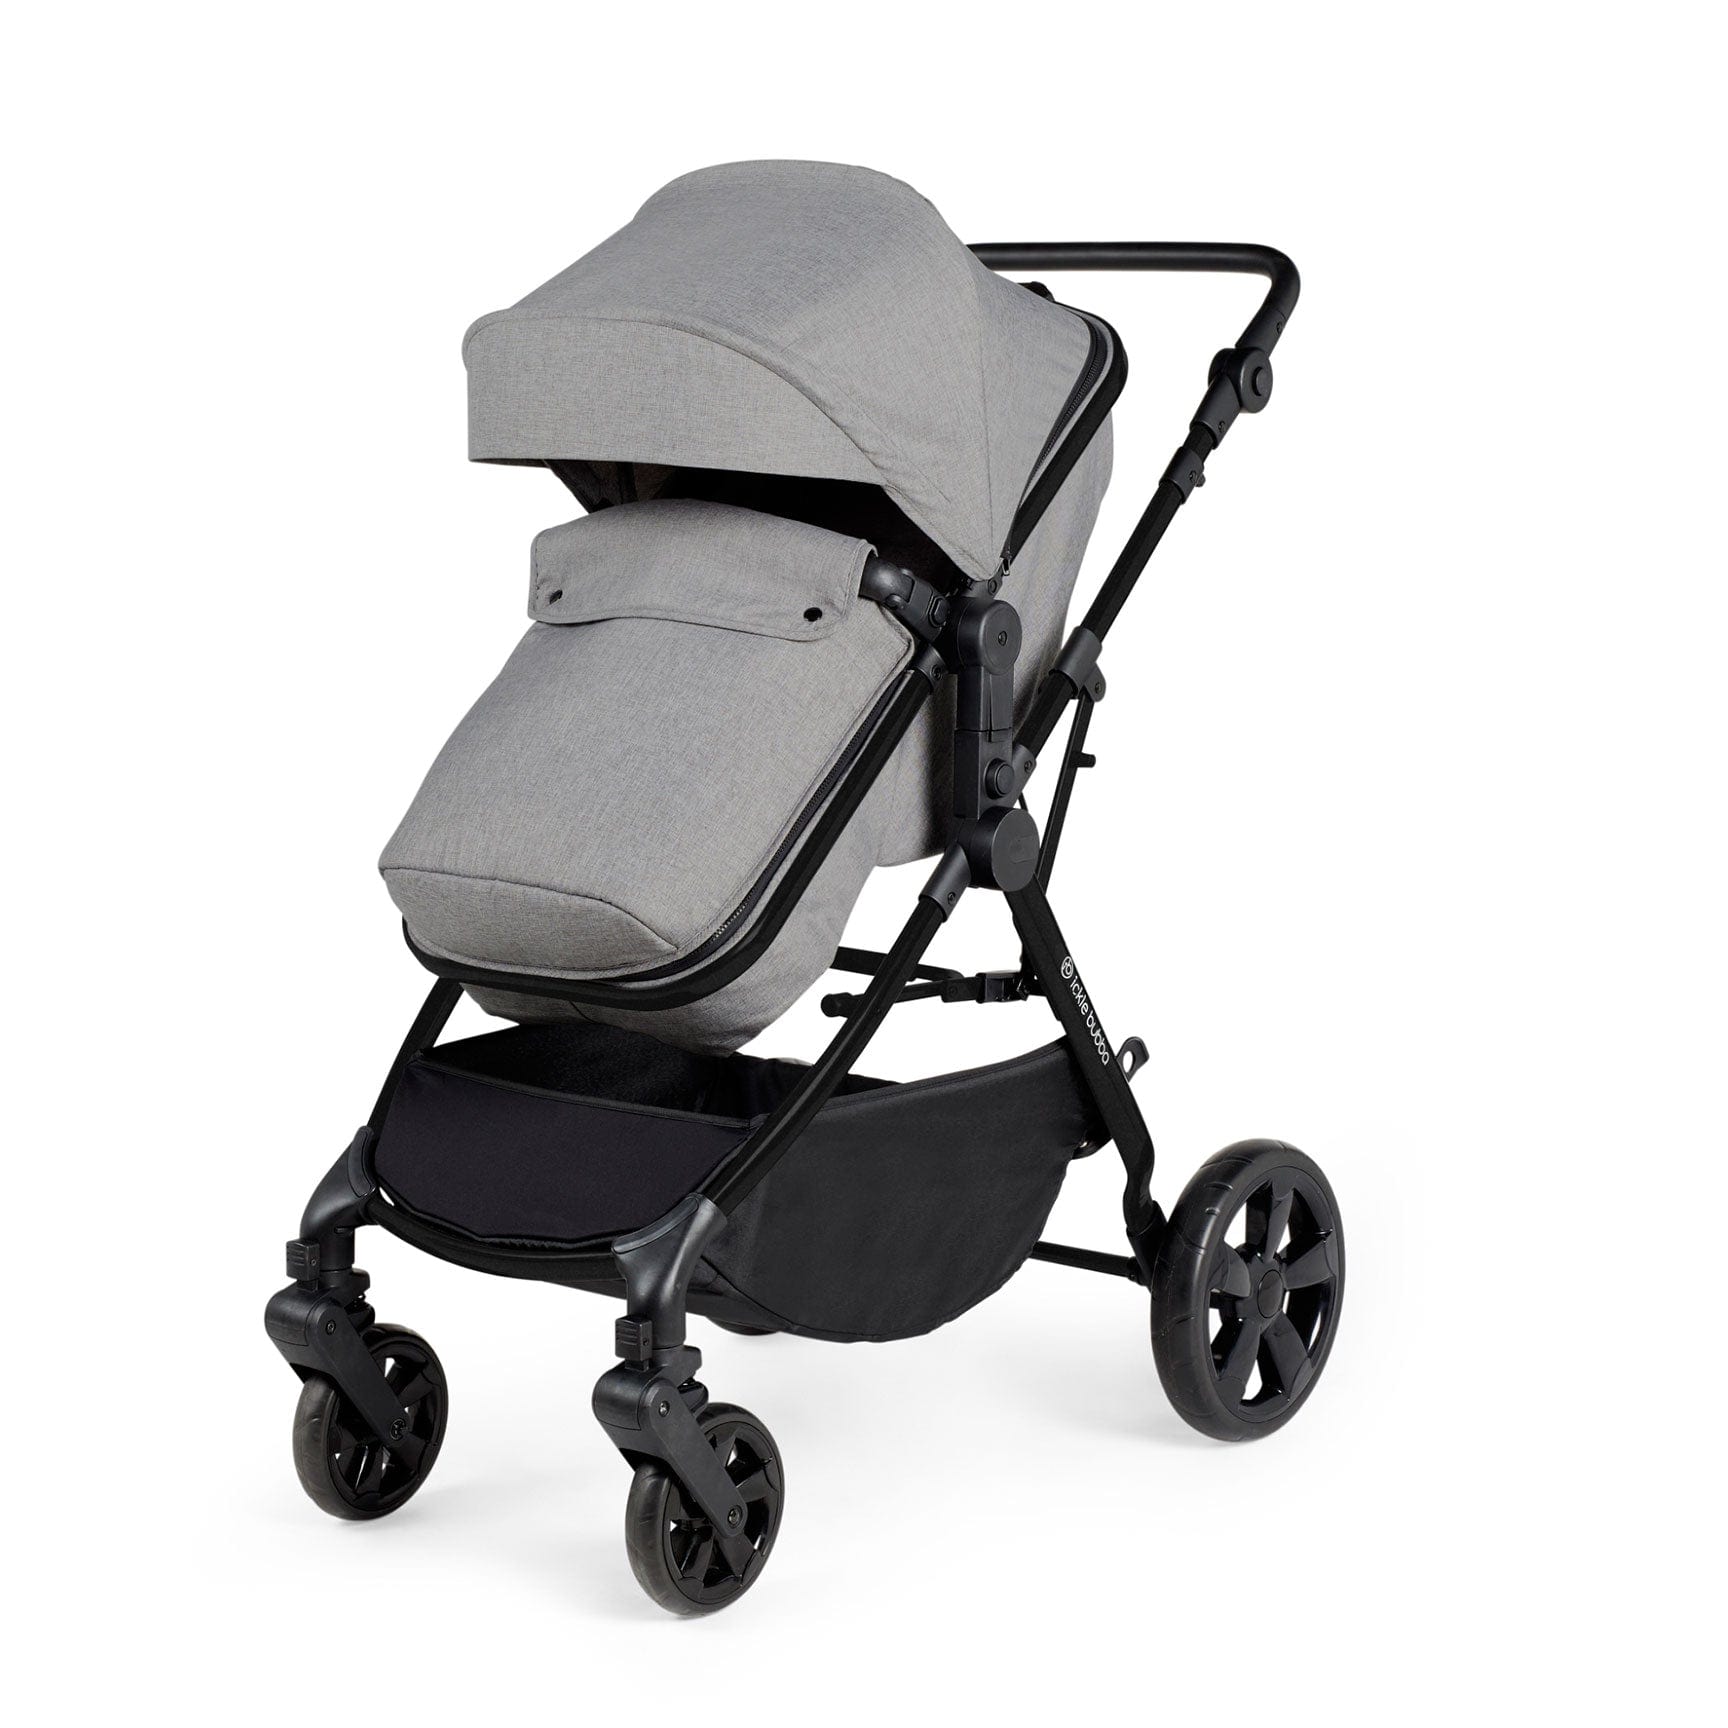 Ickle Bubba Comet 3-in-1 Travel System with Astral Car Seat in Space Grey Baby Prams 10-008-101-014 5056515025767